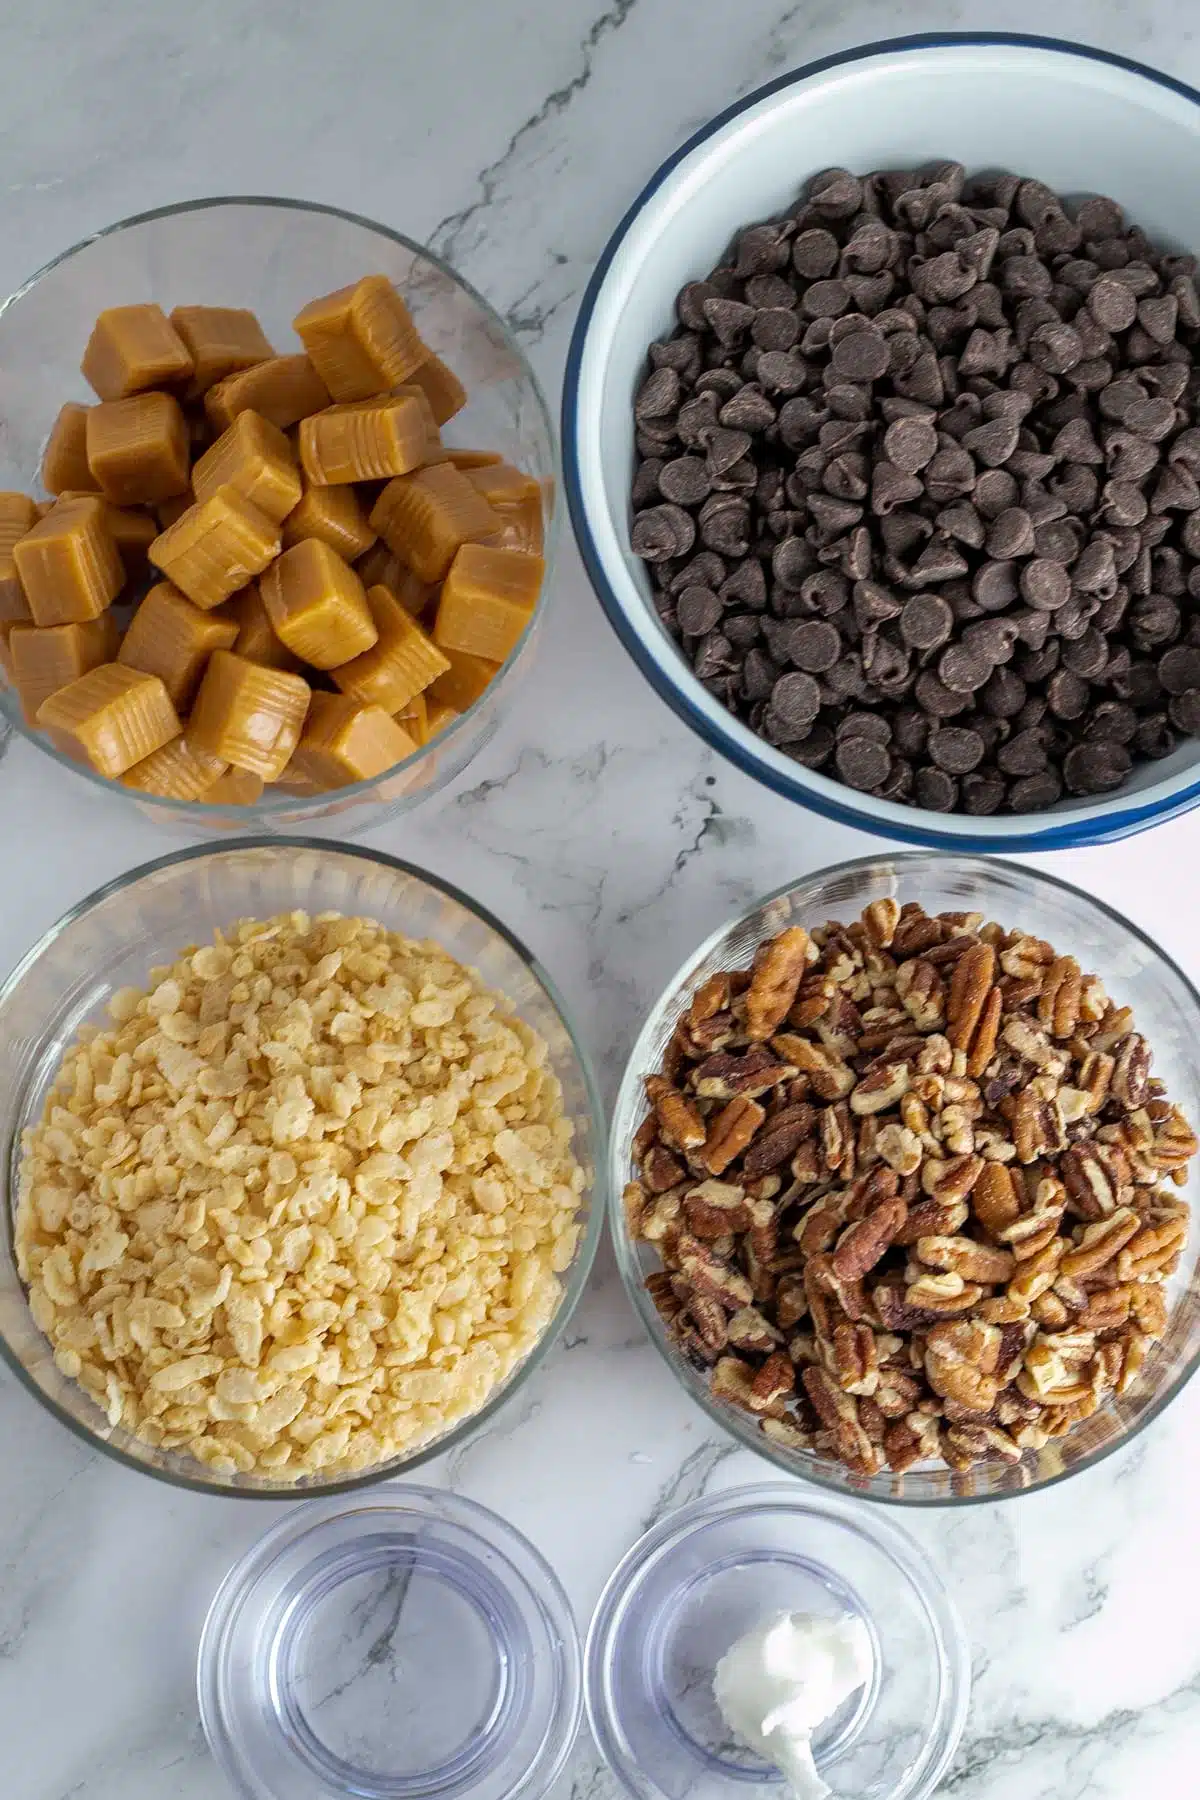 Best chocolate billionaires candy recipe ingredients measured out and ready to start making for the holidays.